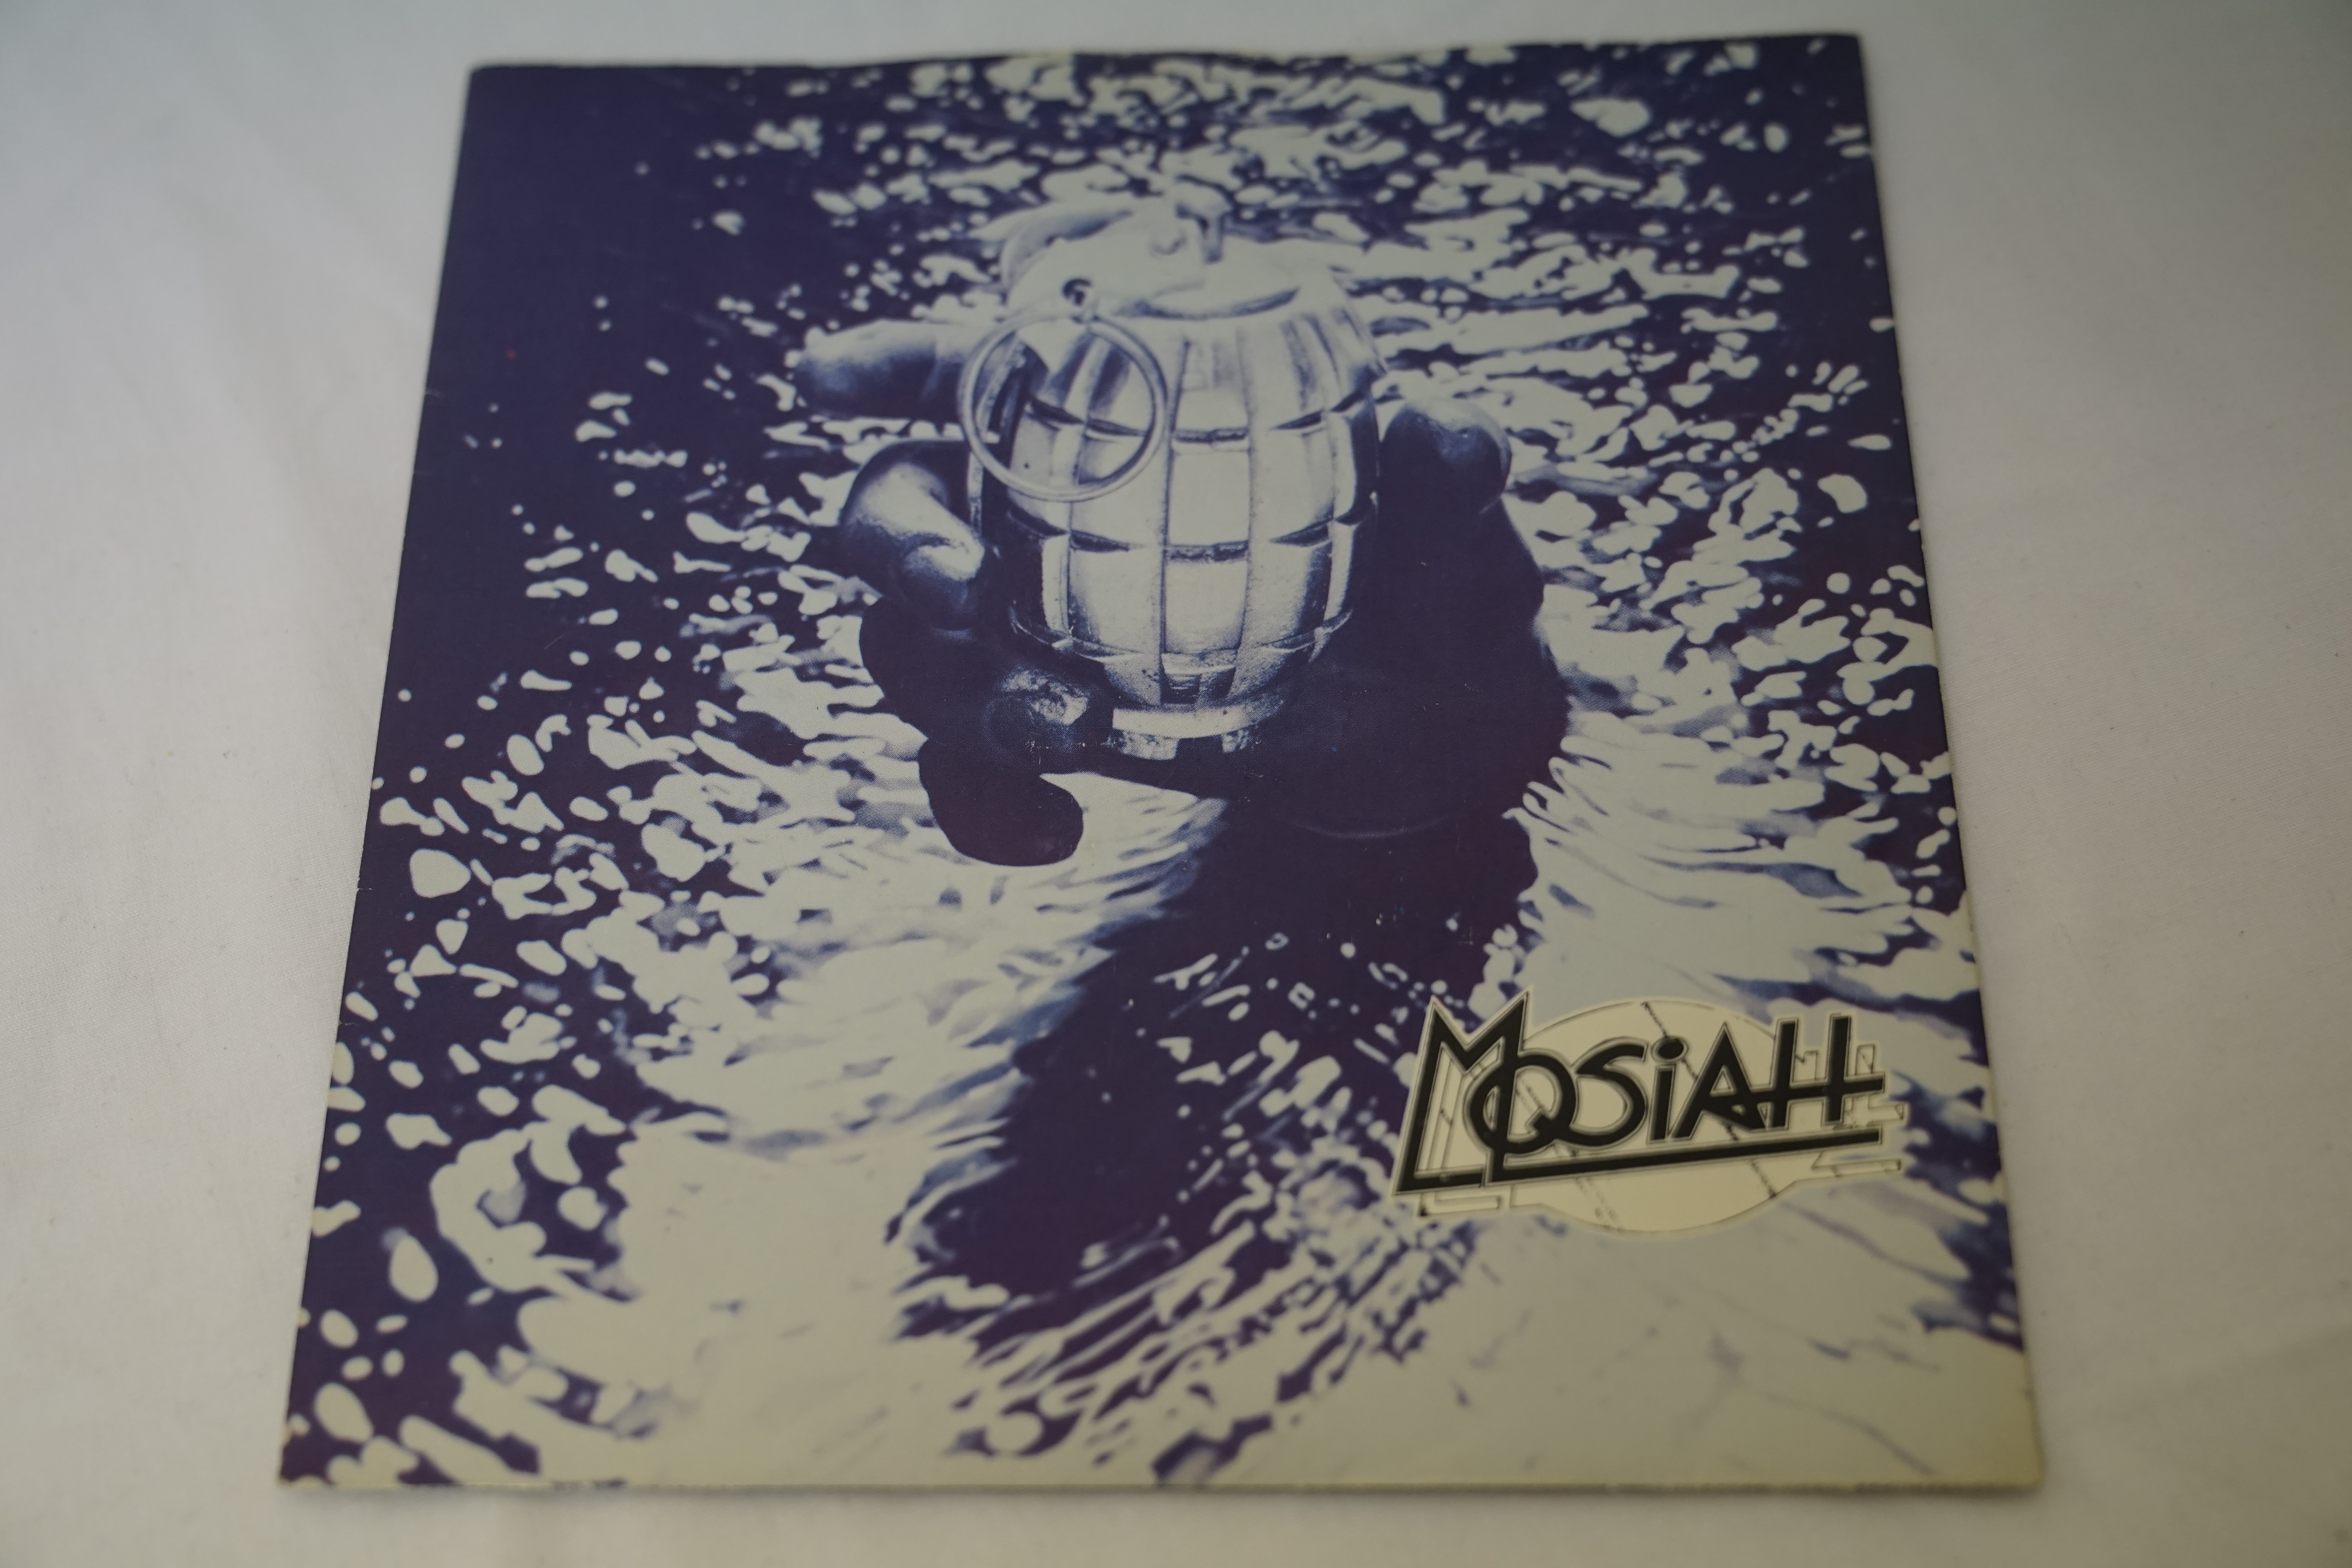 Vinyl - Mosiah - Channel Dub / Rumours Of War (Big Records SOLD 6 DEMO PROMO) NM archive - Image 4 of 4